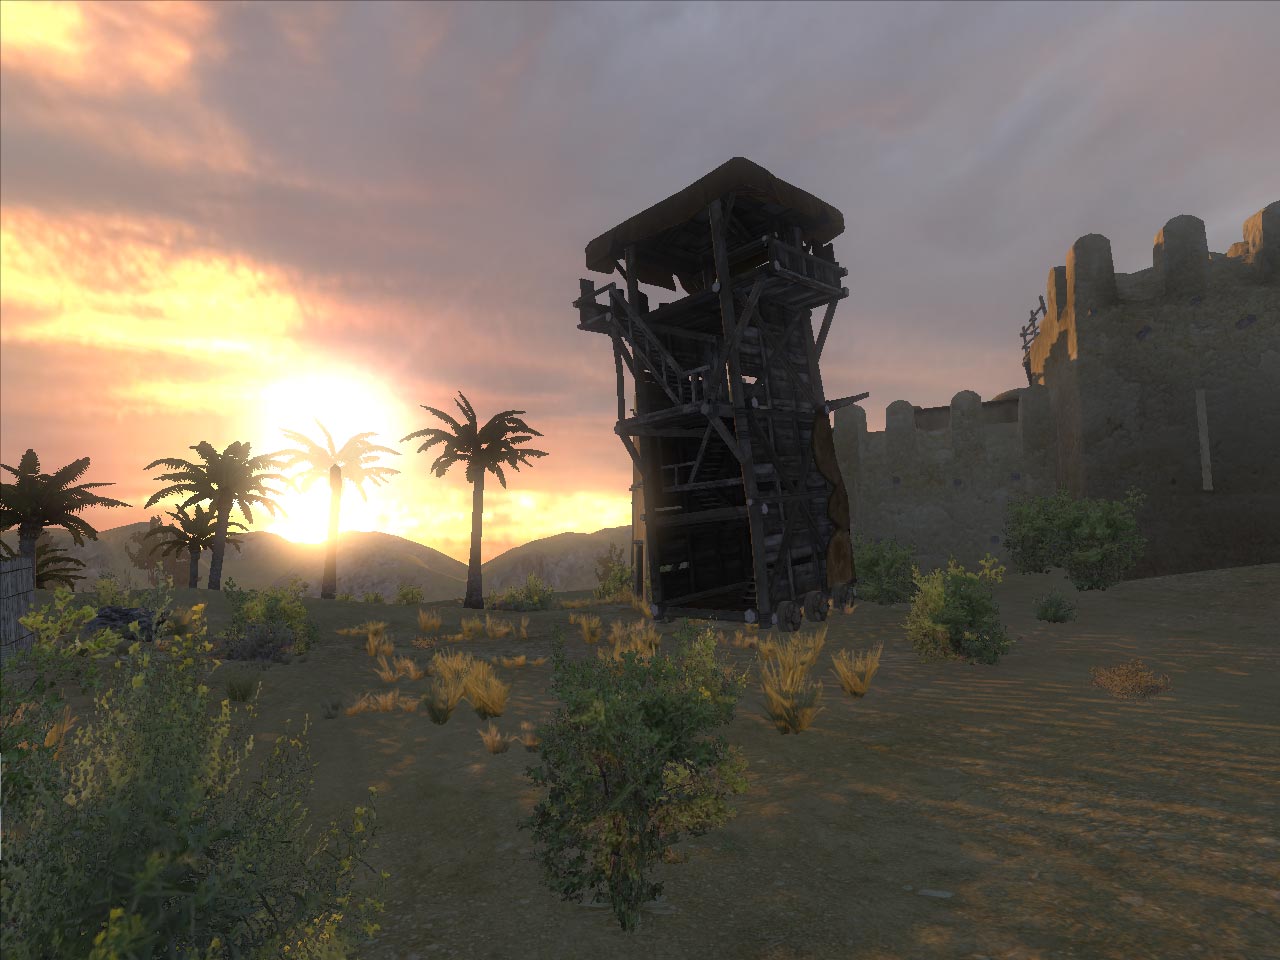 Media asset in full size related to 3dfxzone.it news item entitled as follows: Taleworlds rilascia Mount & Blade: Warband PC Patch 1.110 | Image Name: news12981_5.jpg